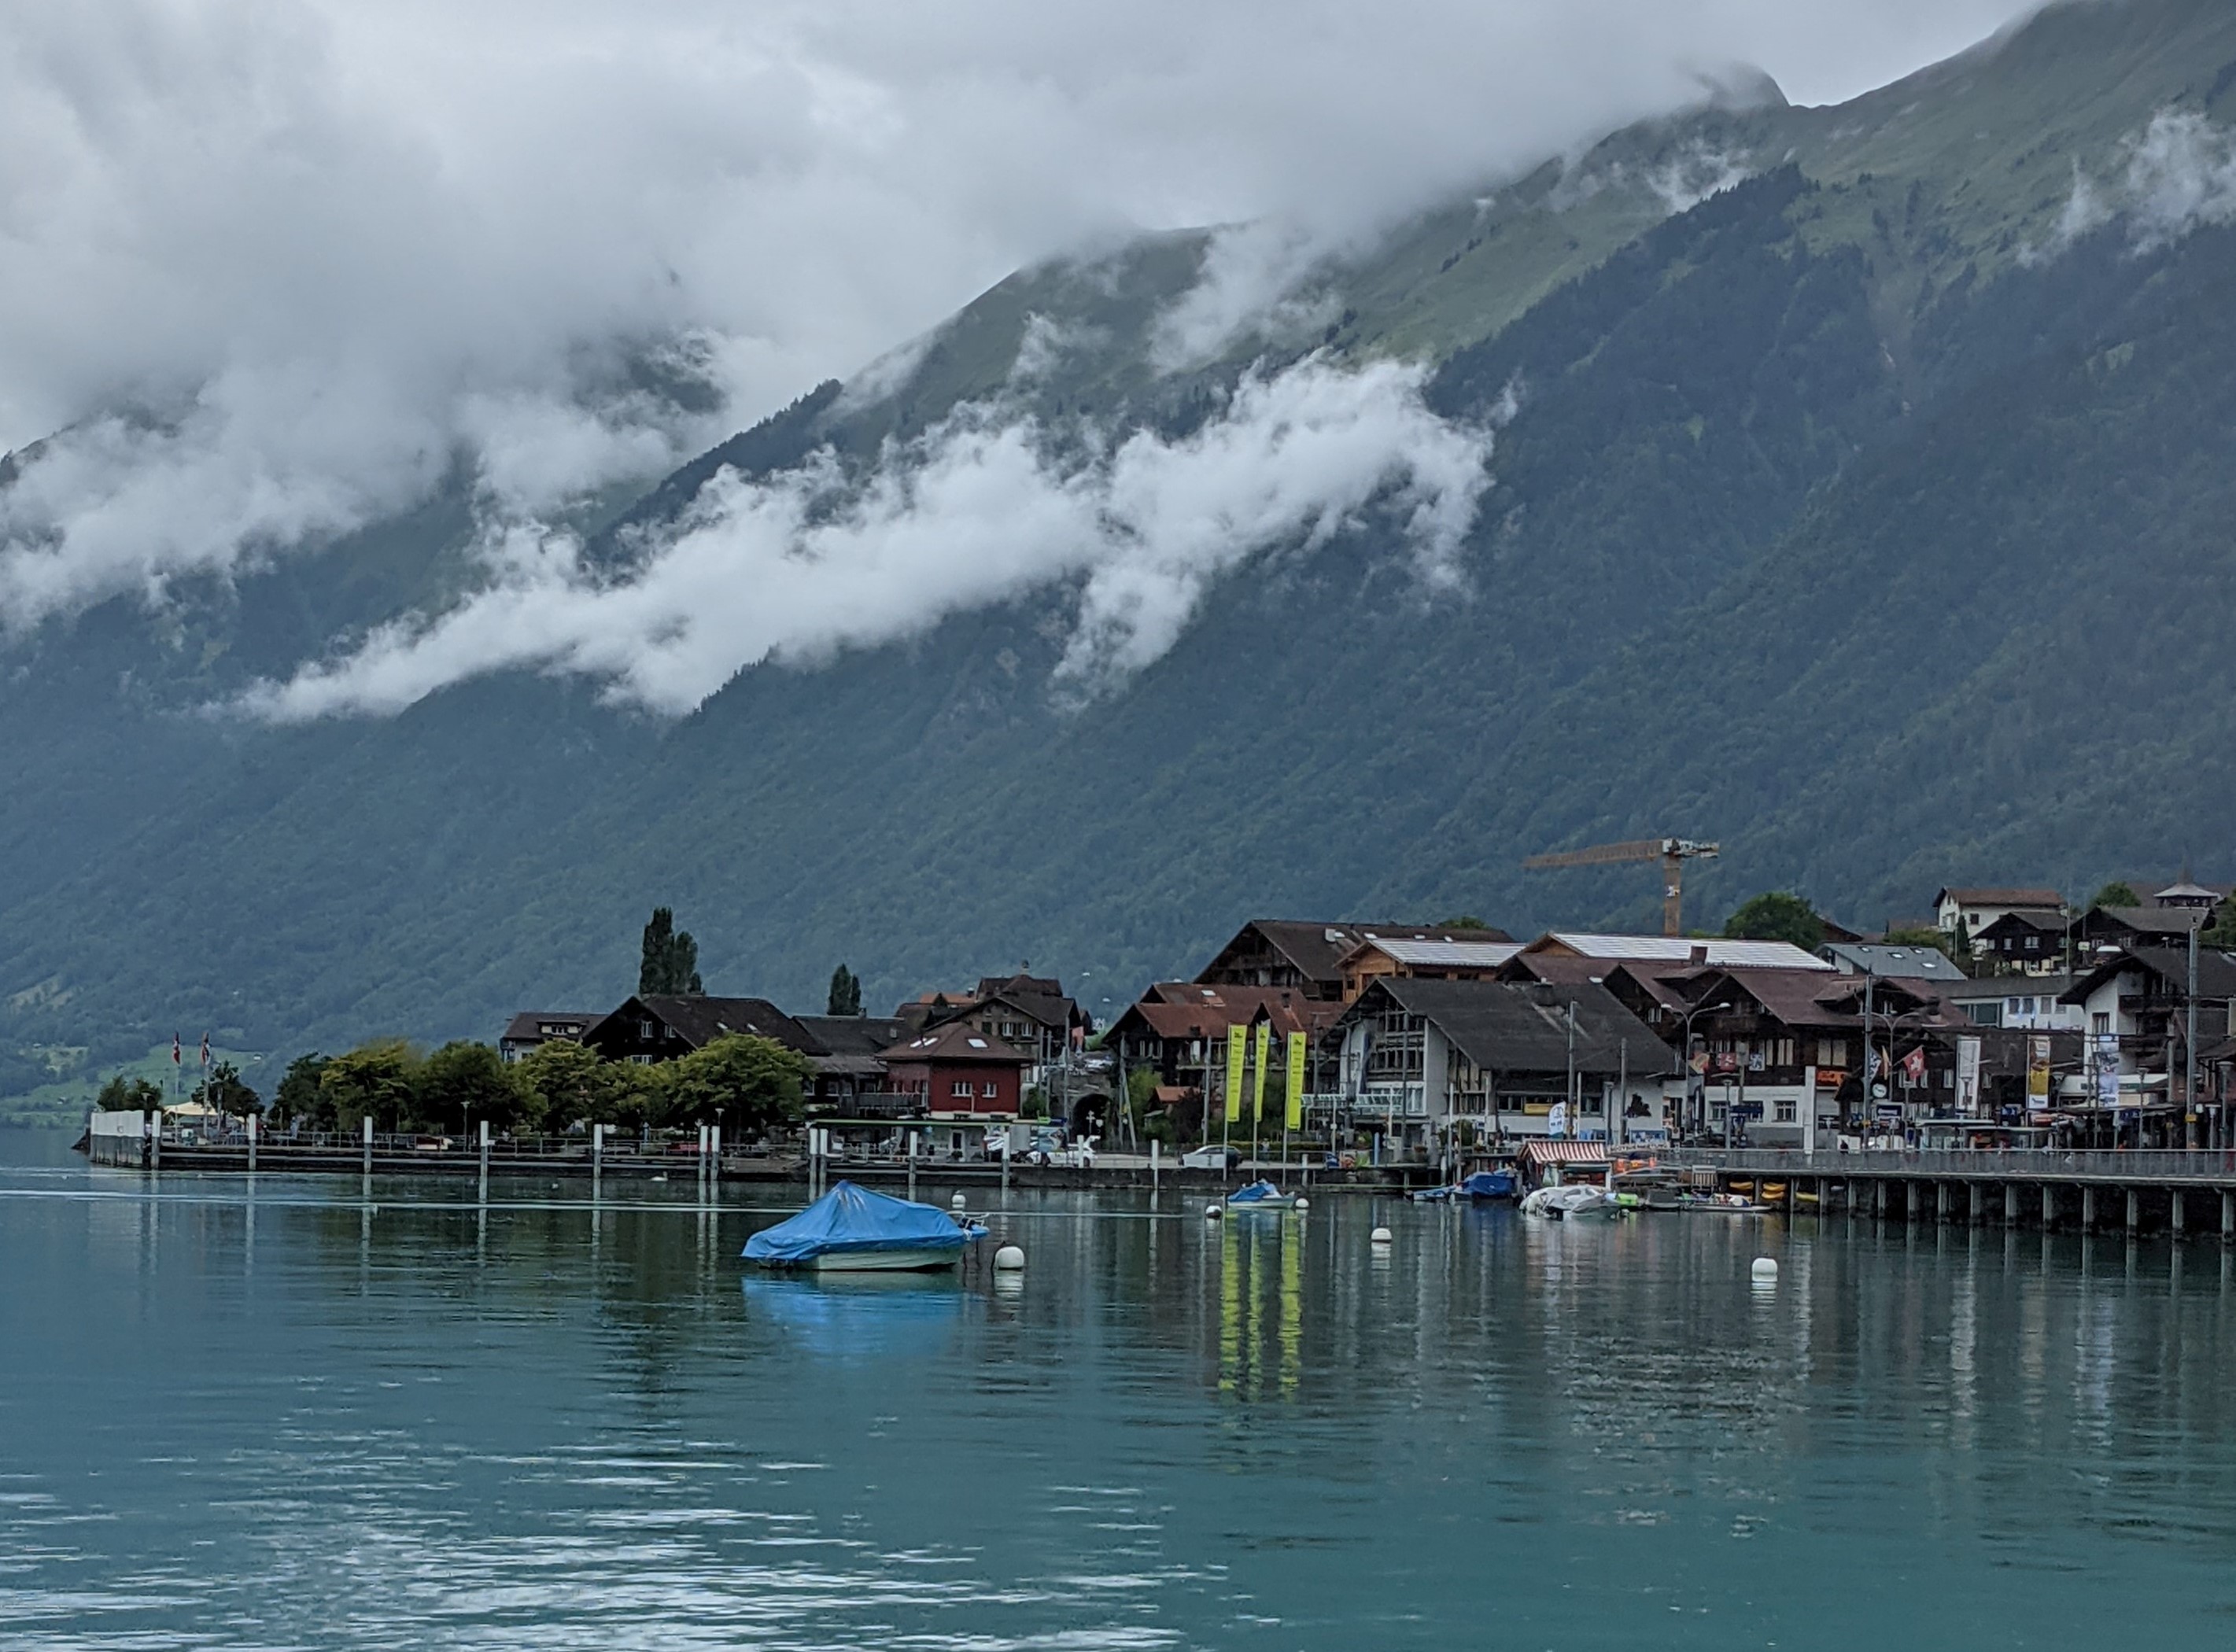 Discover the Best of Interlaken, Switzerland - A Summer Vacation Destination for Adventure and Scenic Beauty